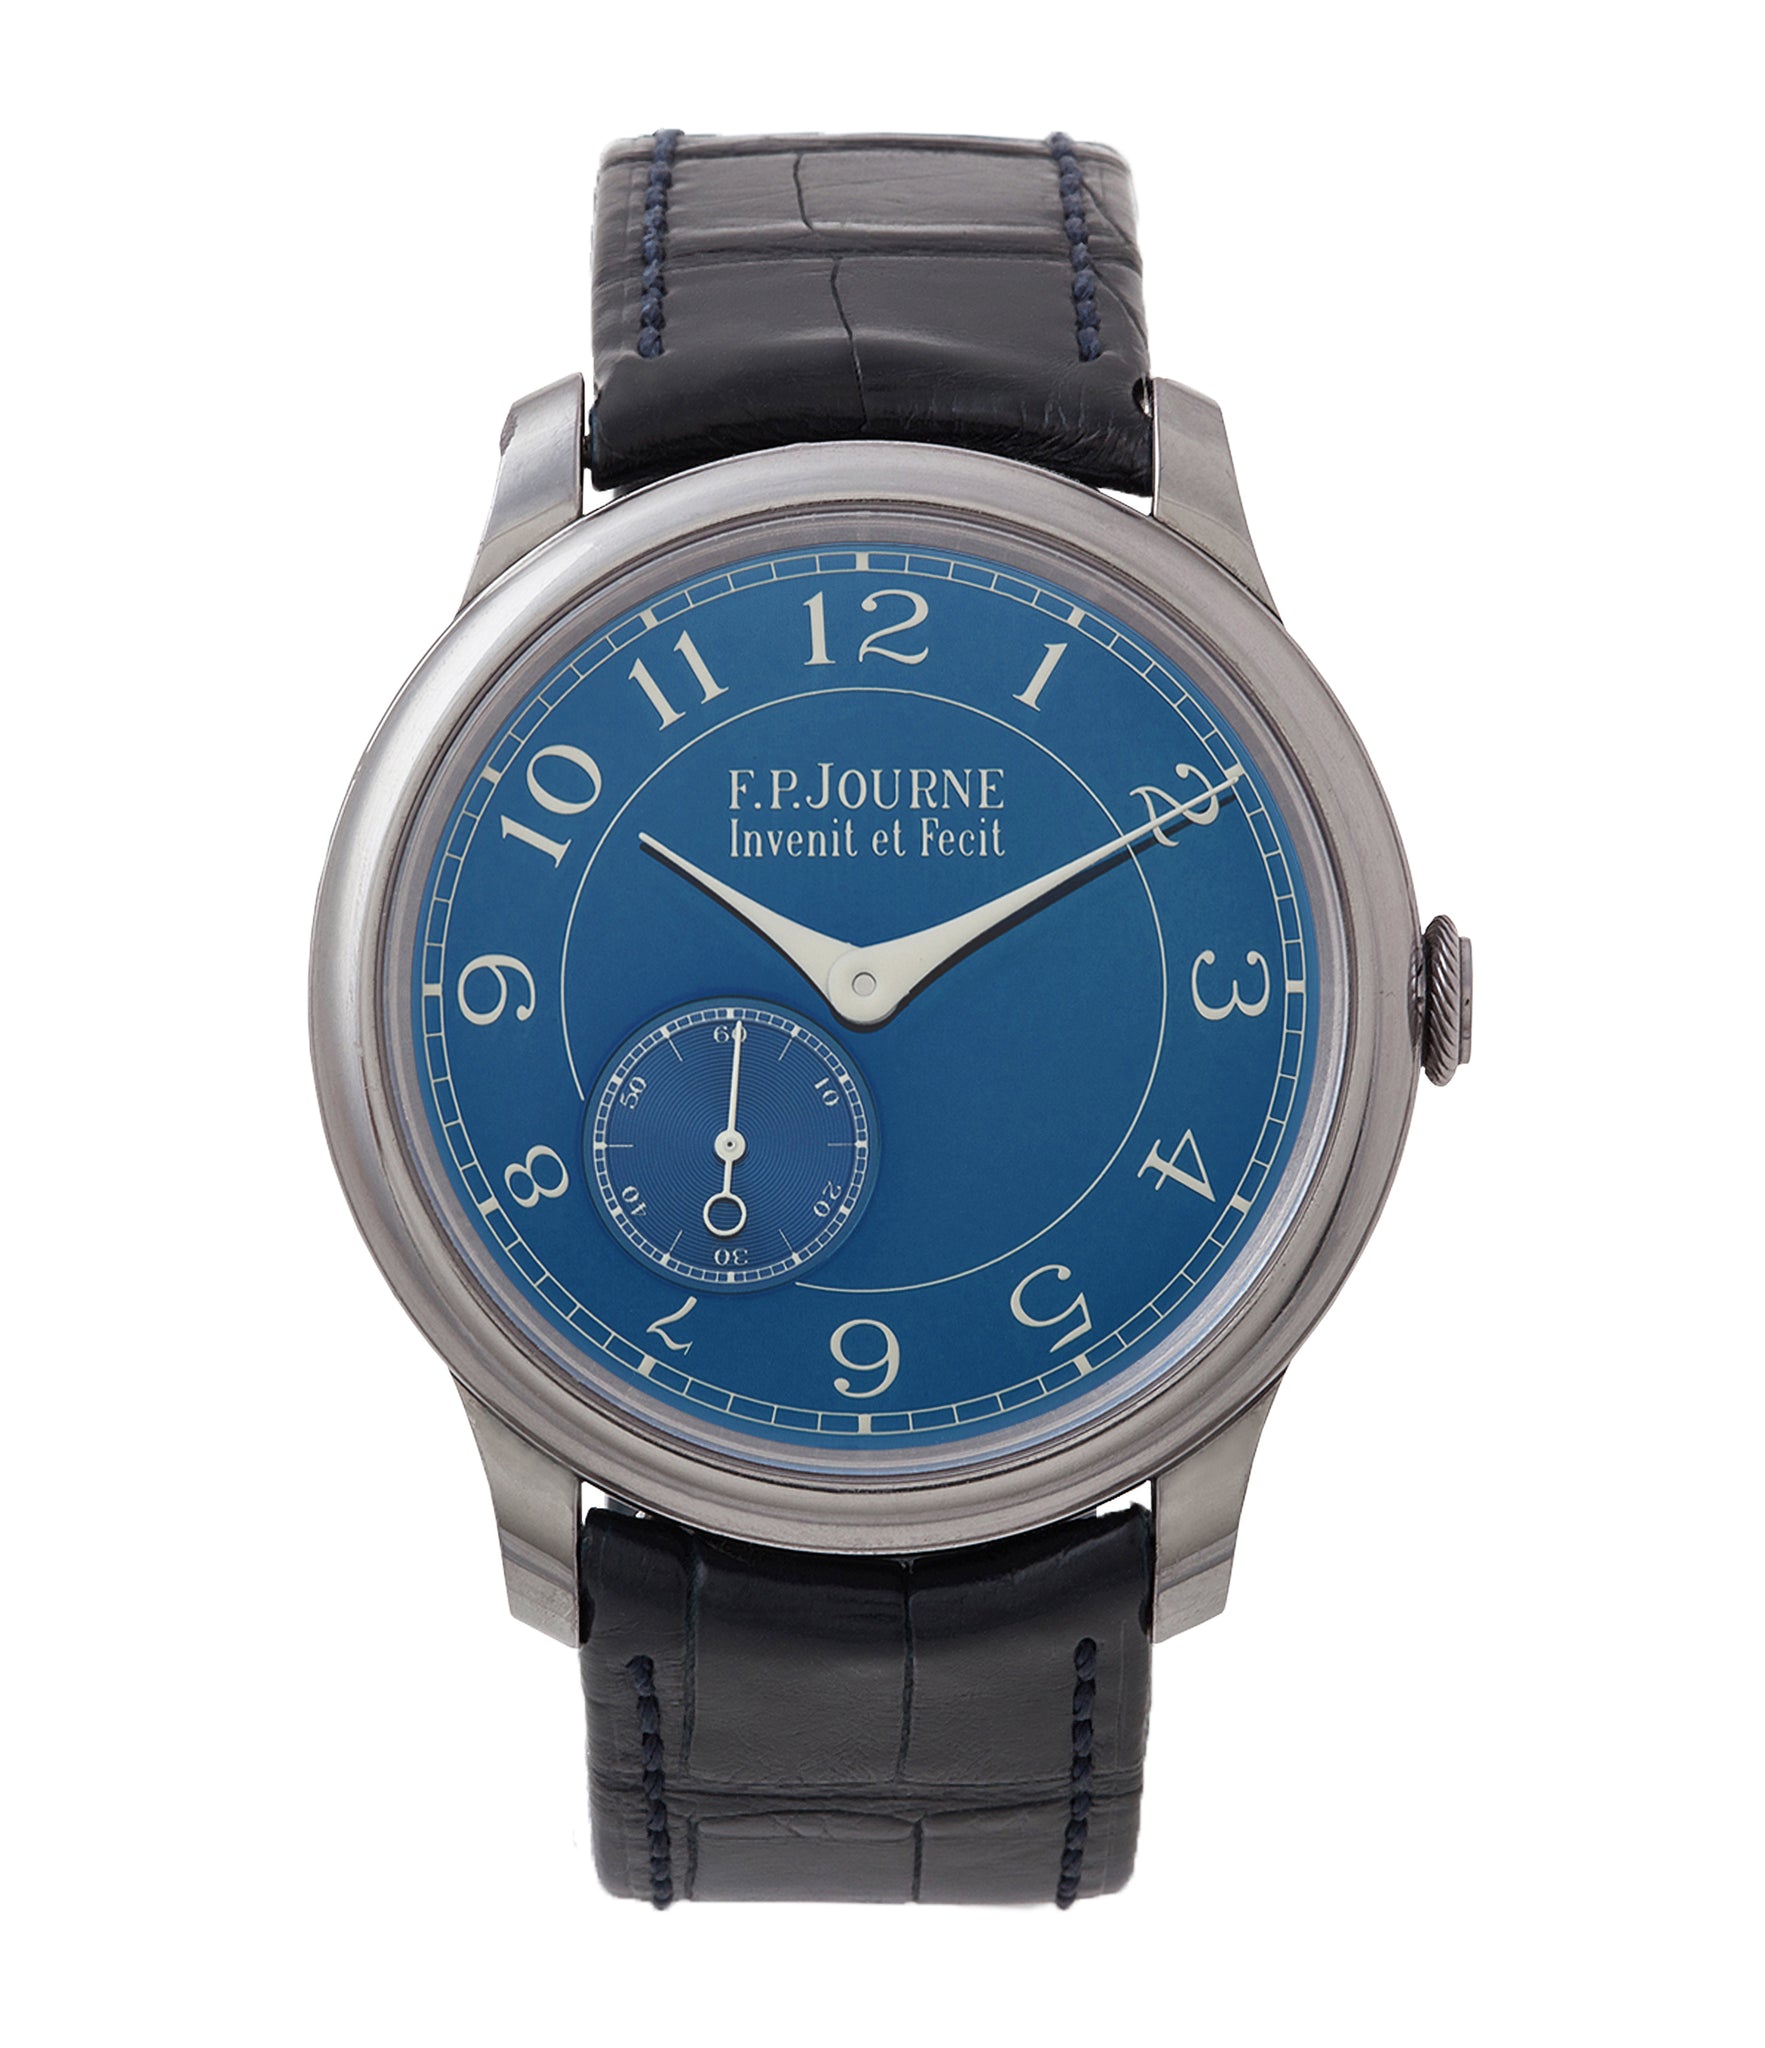 buy F. P. Journe Chronometre Bleu tantalum blue dial watch independent watchmaker for sale online at A Collected Man London UK specialist of rare watches 